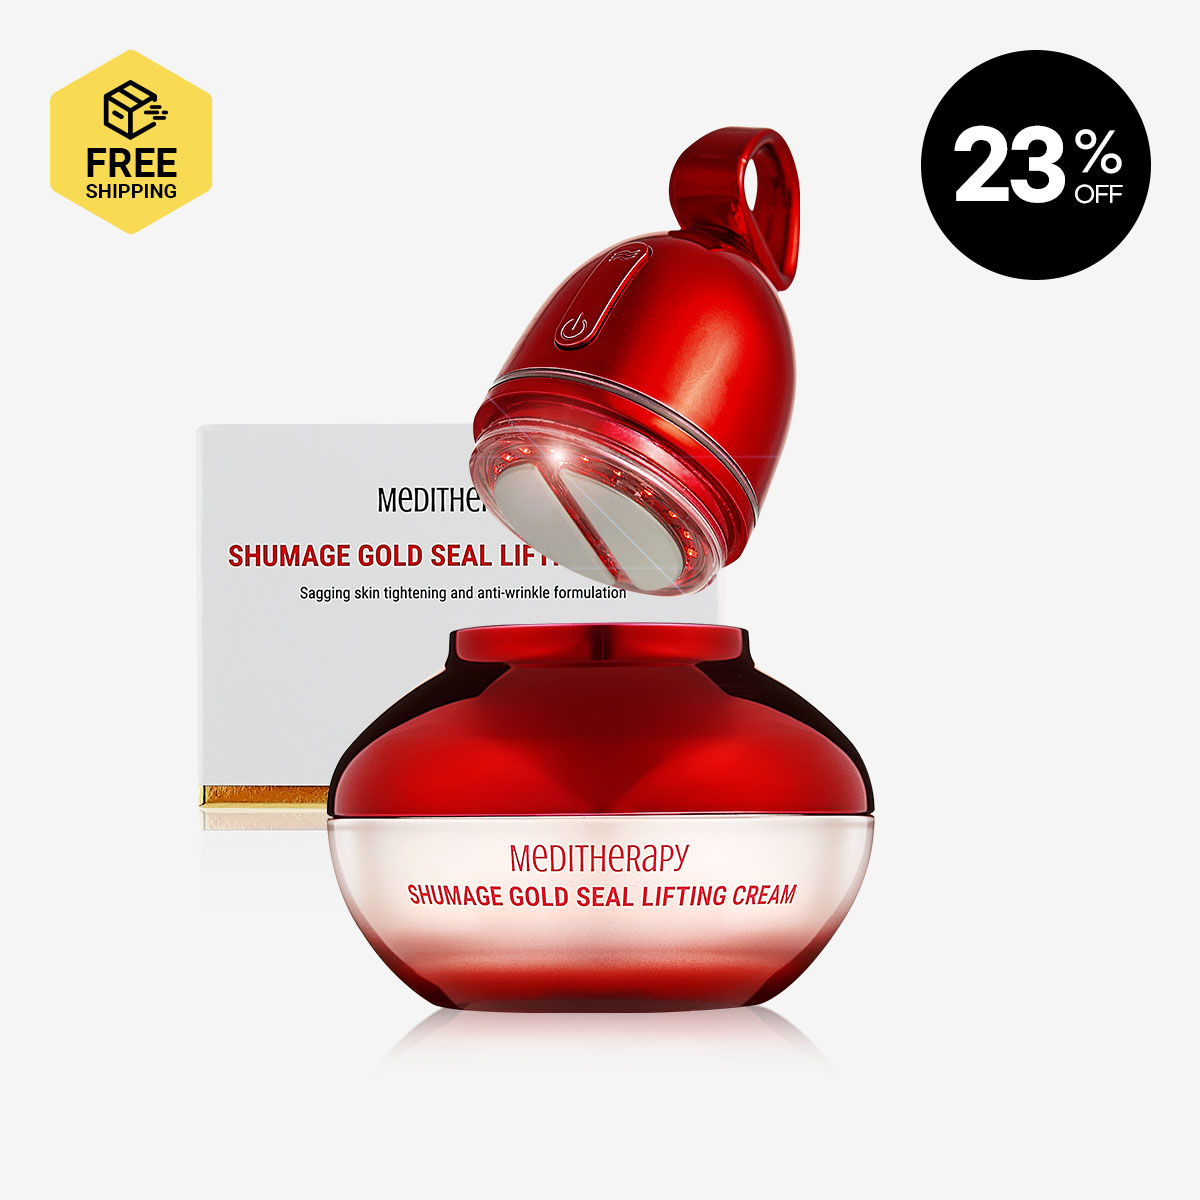 [MEDITHERAPY] Shumage Gold Seal Lifting Cream + Shumage EMS device